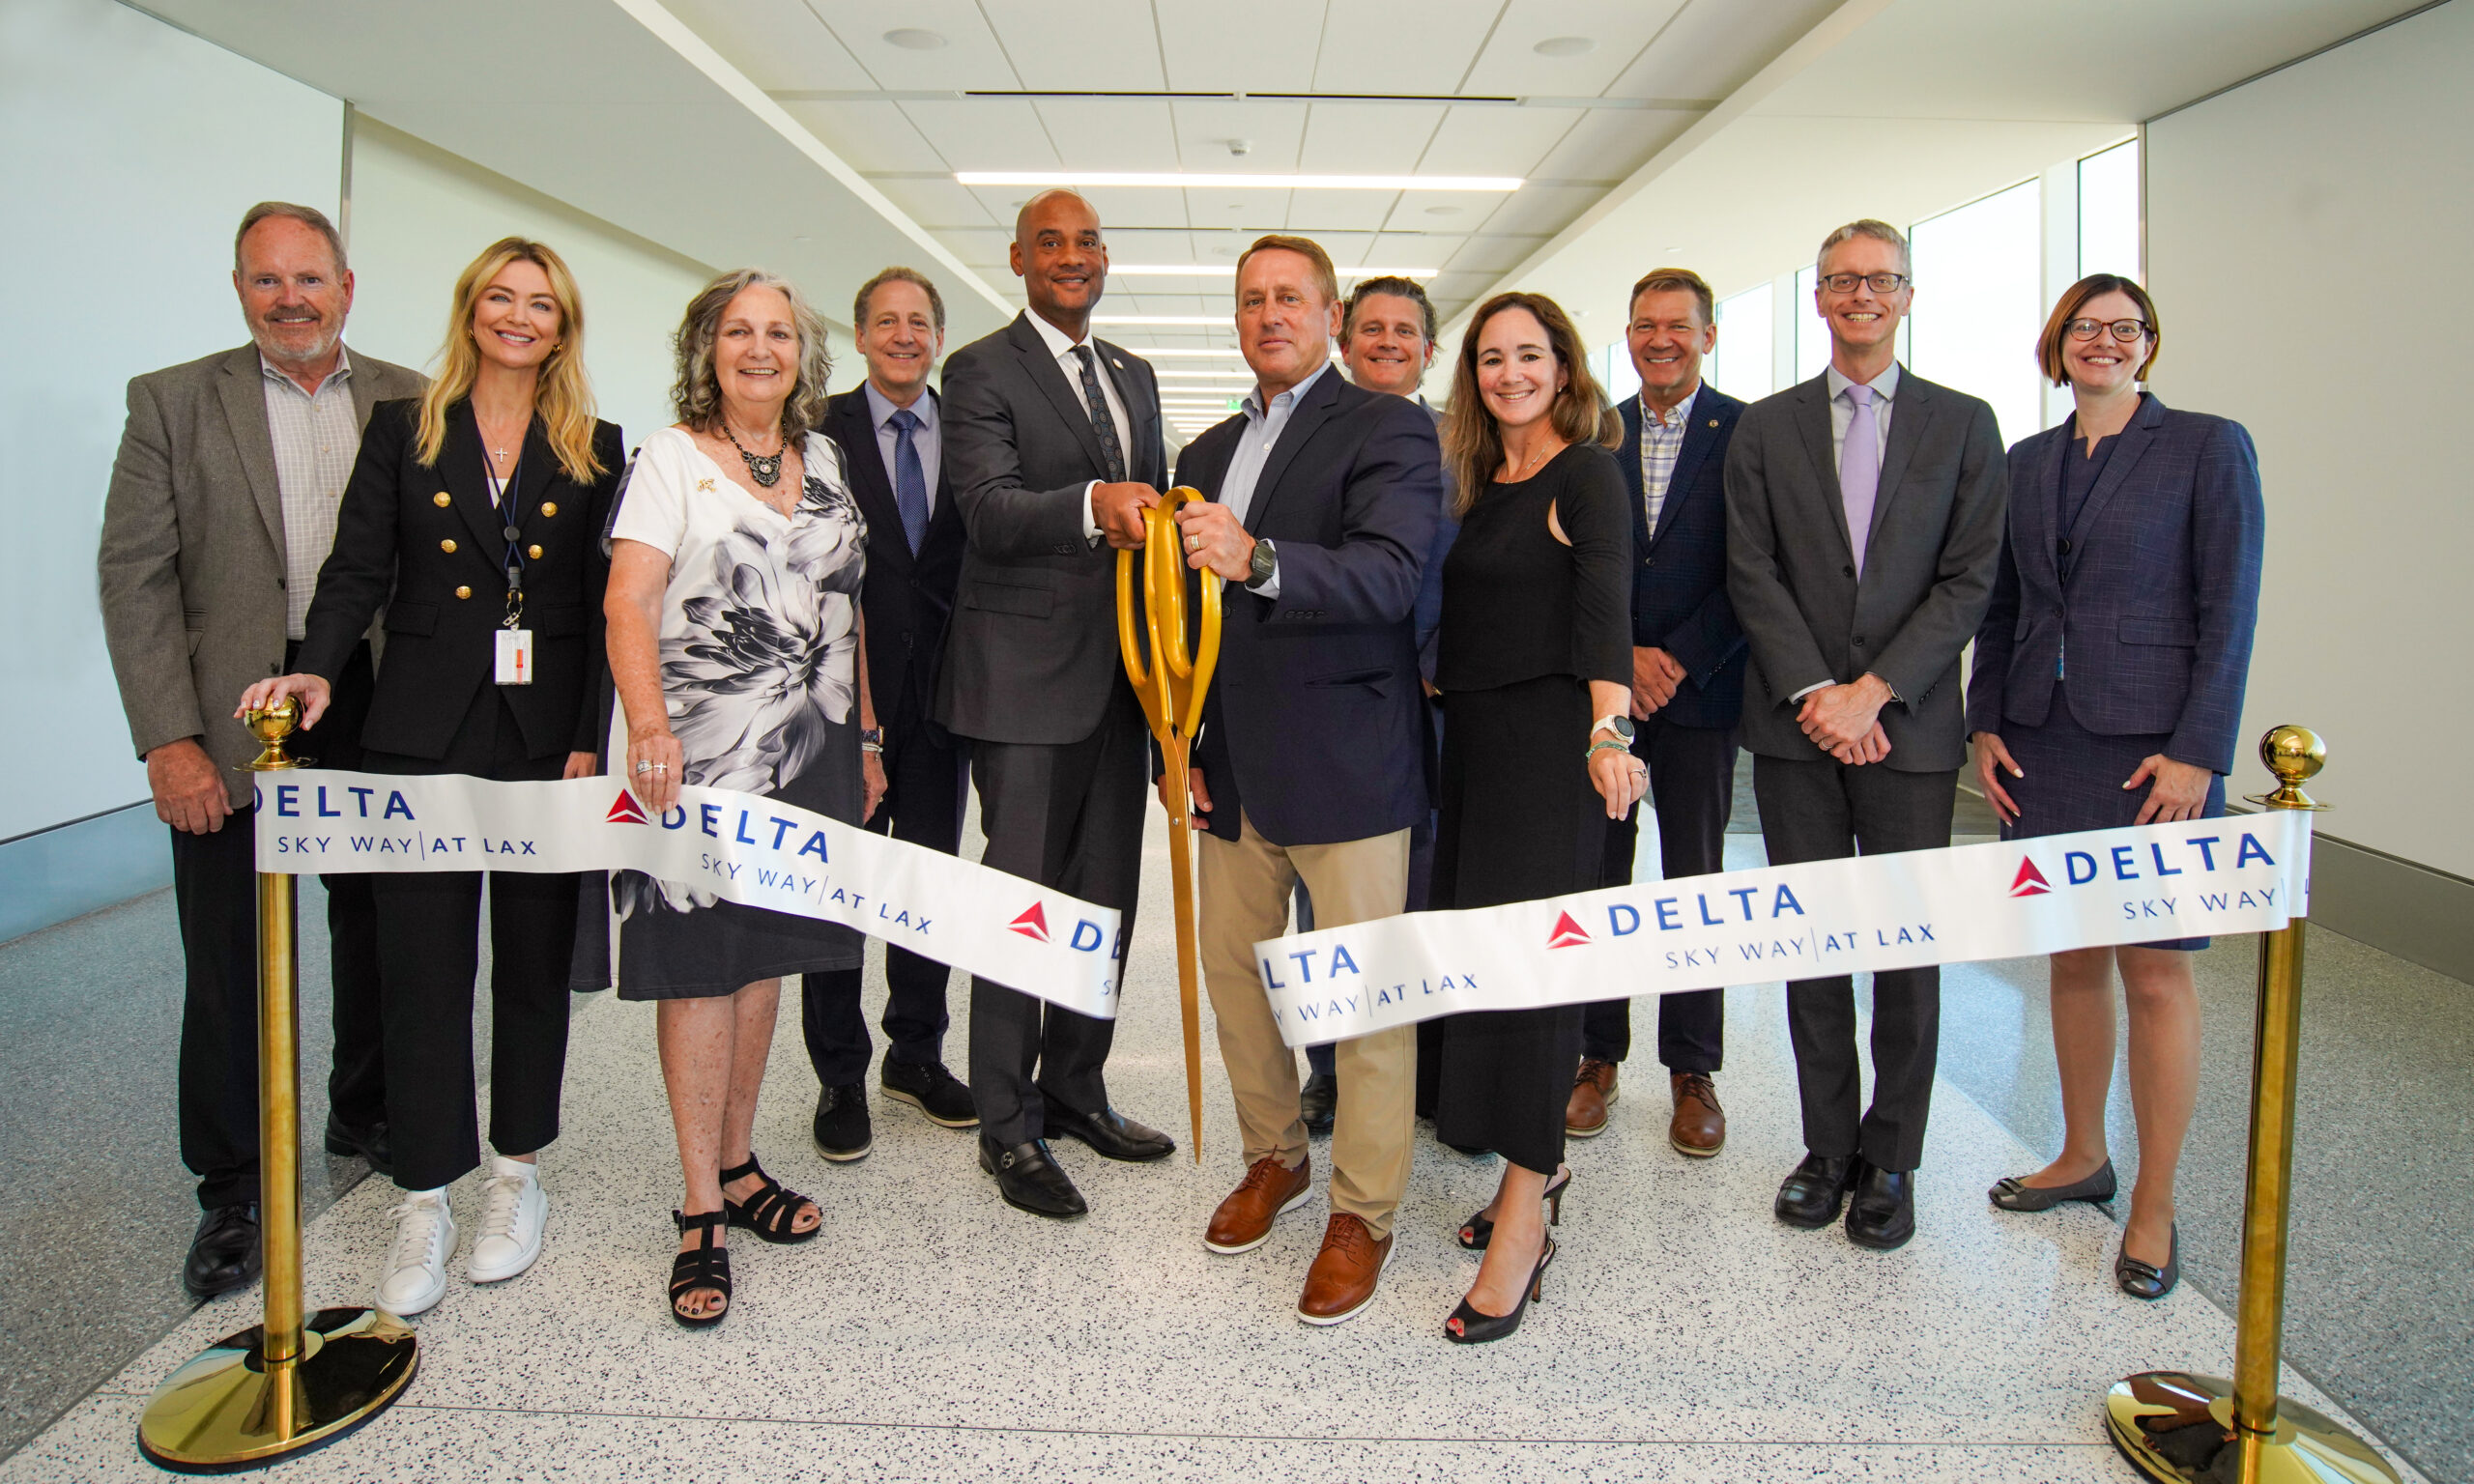 Los Angeles World Airports (LAWA) and Delta executives, members of Los Angeles’s Board of Airport Commissioners (BOAC) and other key stakeholders celebrated the opening of the Delta Sky Way project at LAX